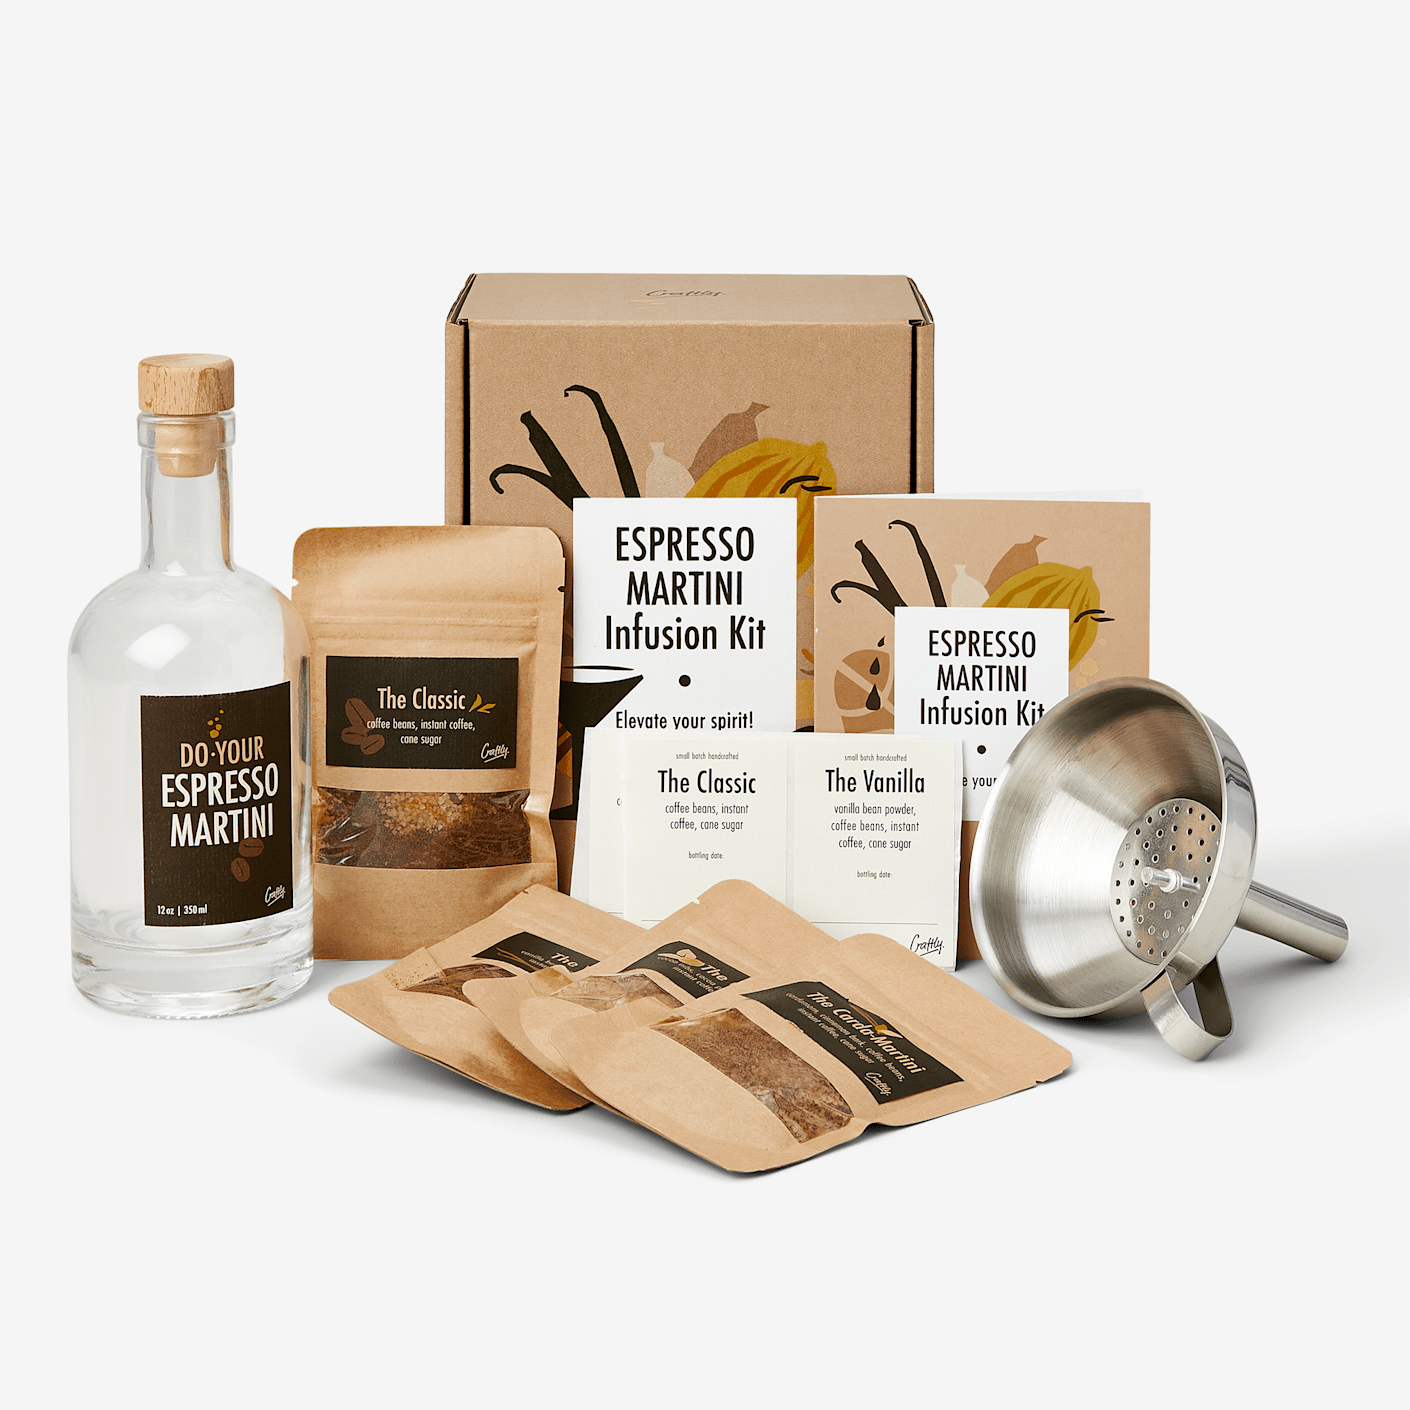 Craftly Espresso Martini Infusion Kit | Homemade Cocktails Kit | Espresso Martini Kit | Natural Cocktail Blends | Birthday Gift for Her | Gifts for